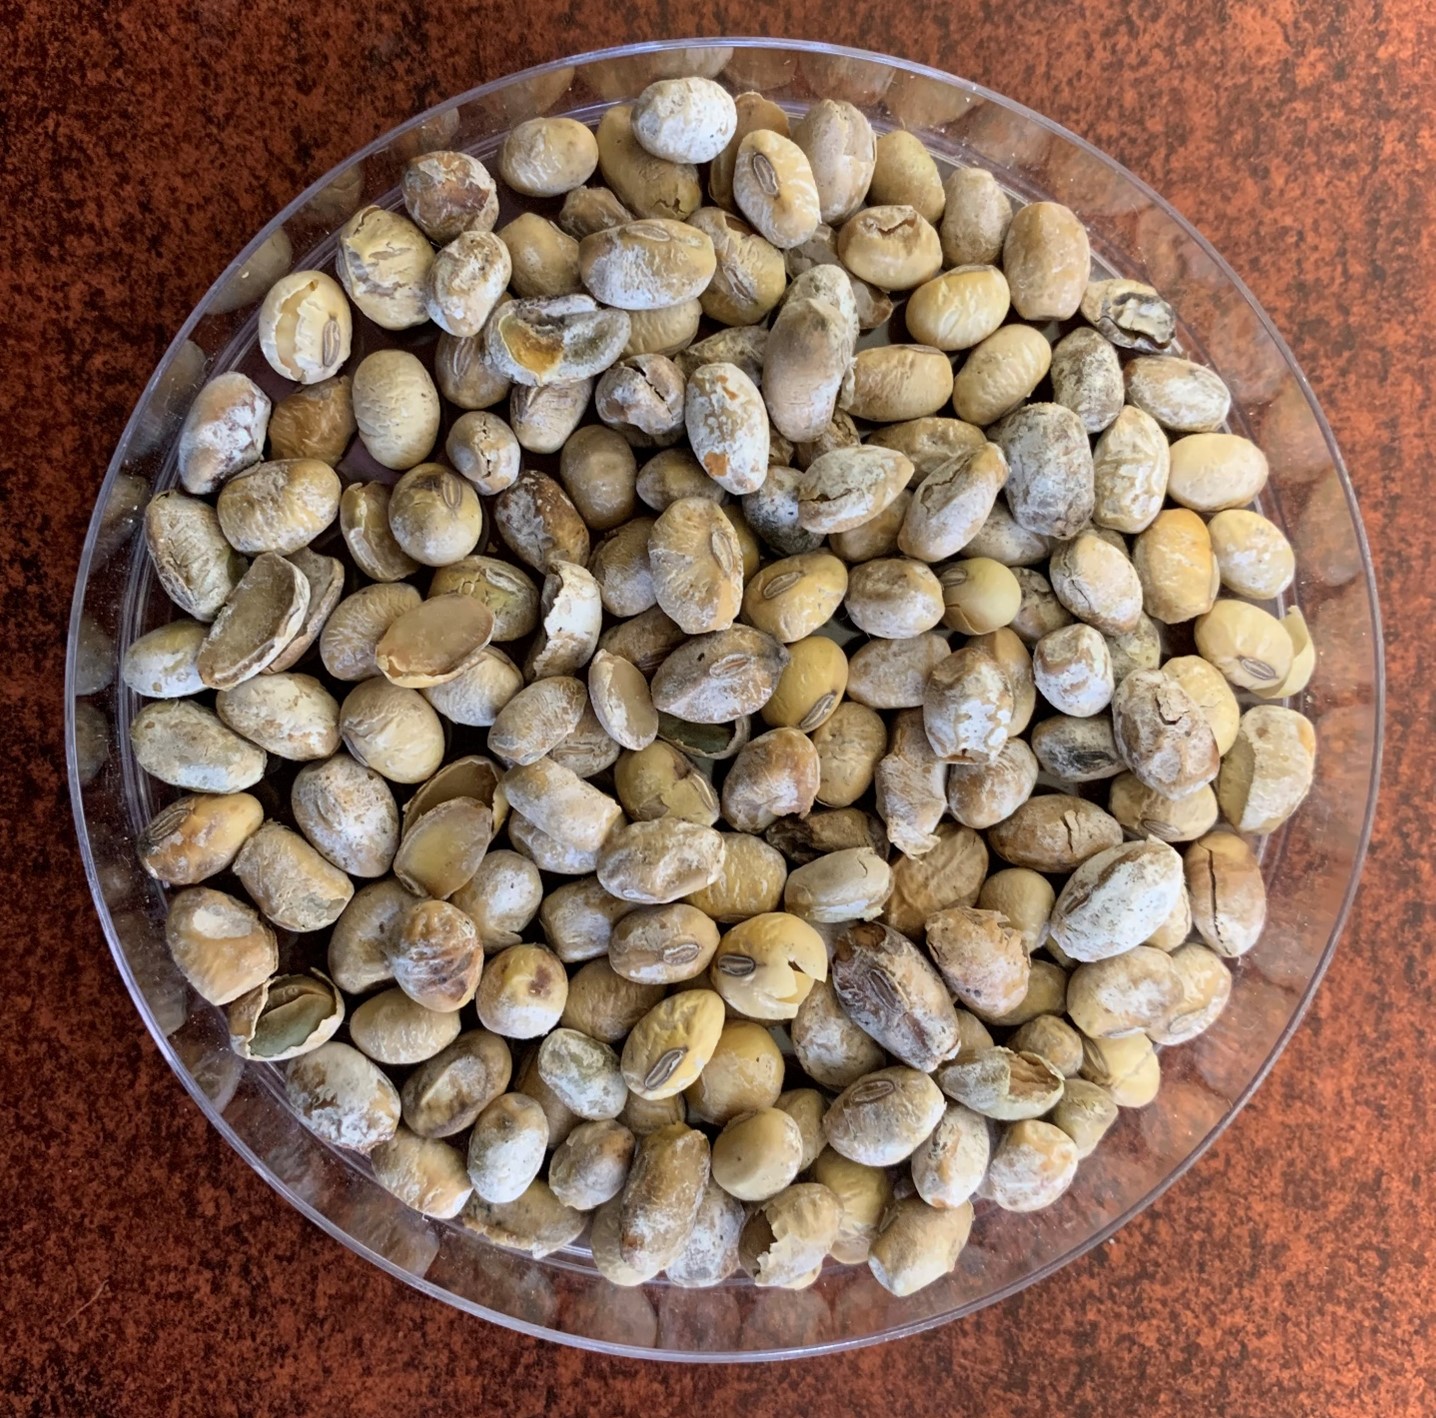 A bowl of soybean seeds infected with Phomopsis seed decay, with a white-chalky and shriveled appearance.